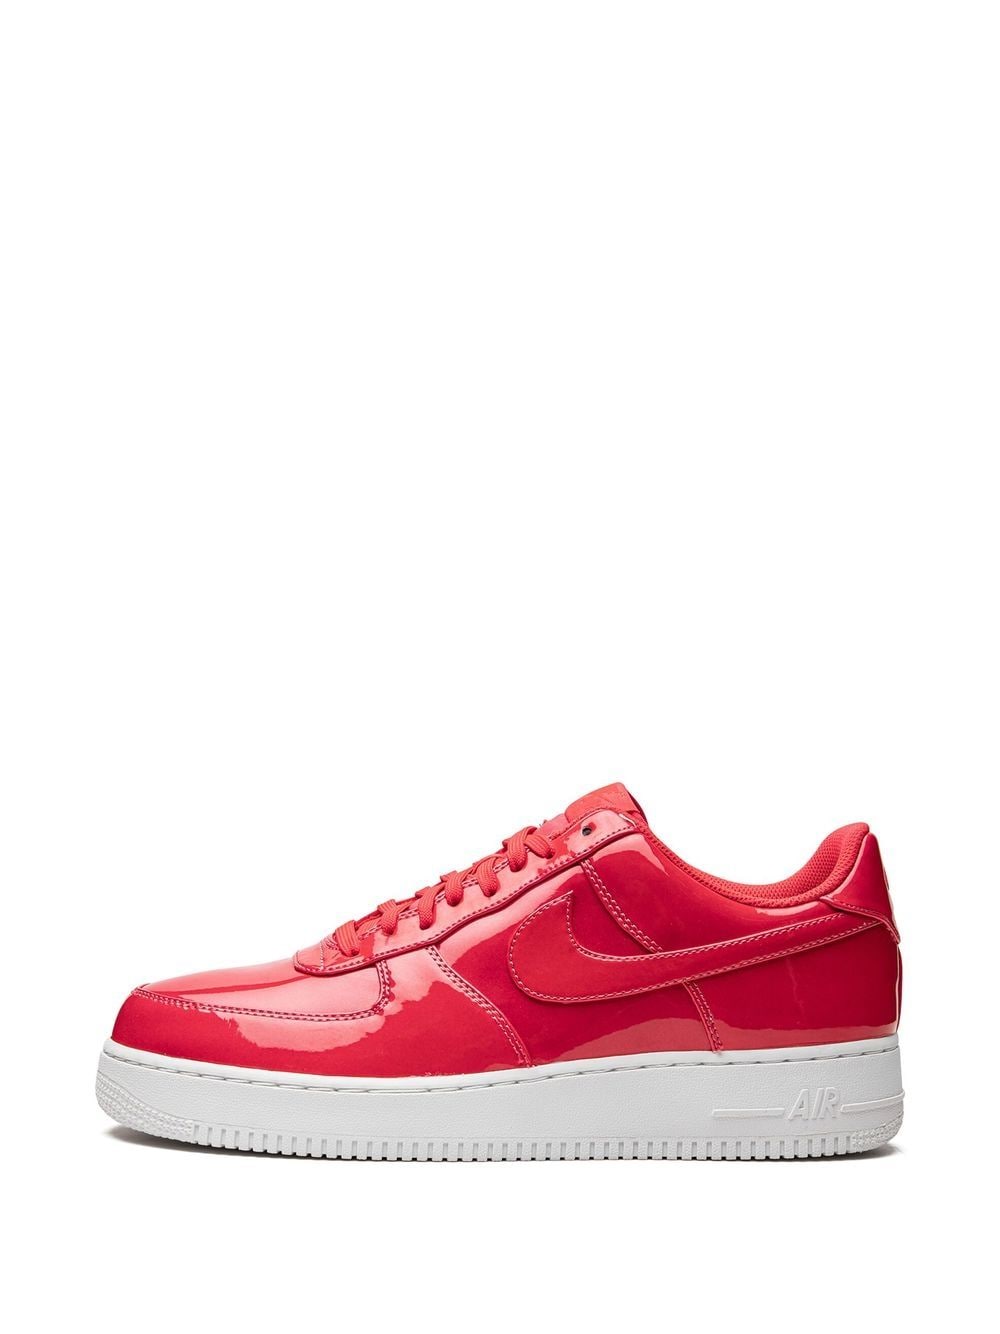 Nike Air Force 1 LV8 UV Low AF1 Siren Red Youth Sz 7Y = Women’s Size 8.5 NEW